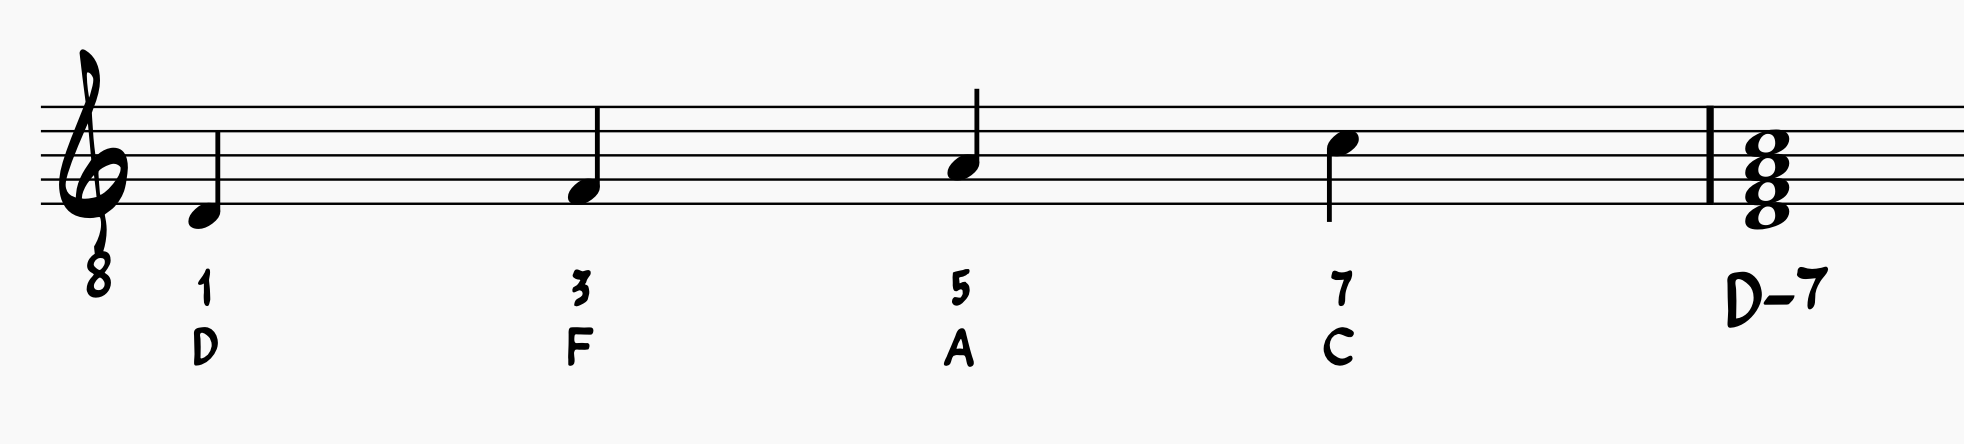 D minor seventh chord as individual notes and as a root position seventh chord.